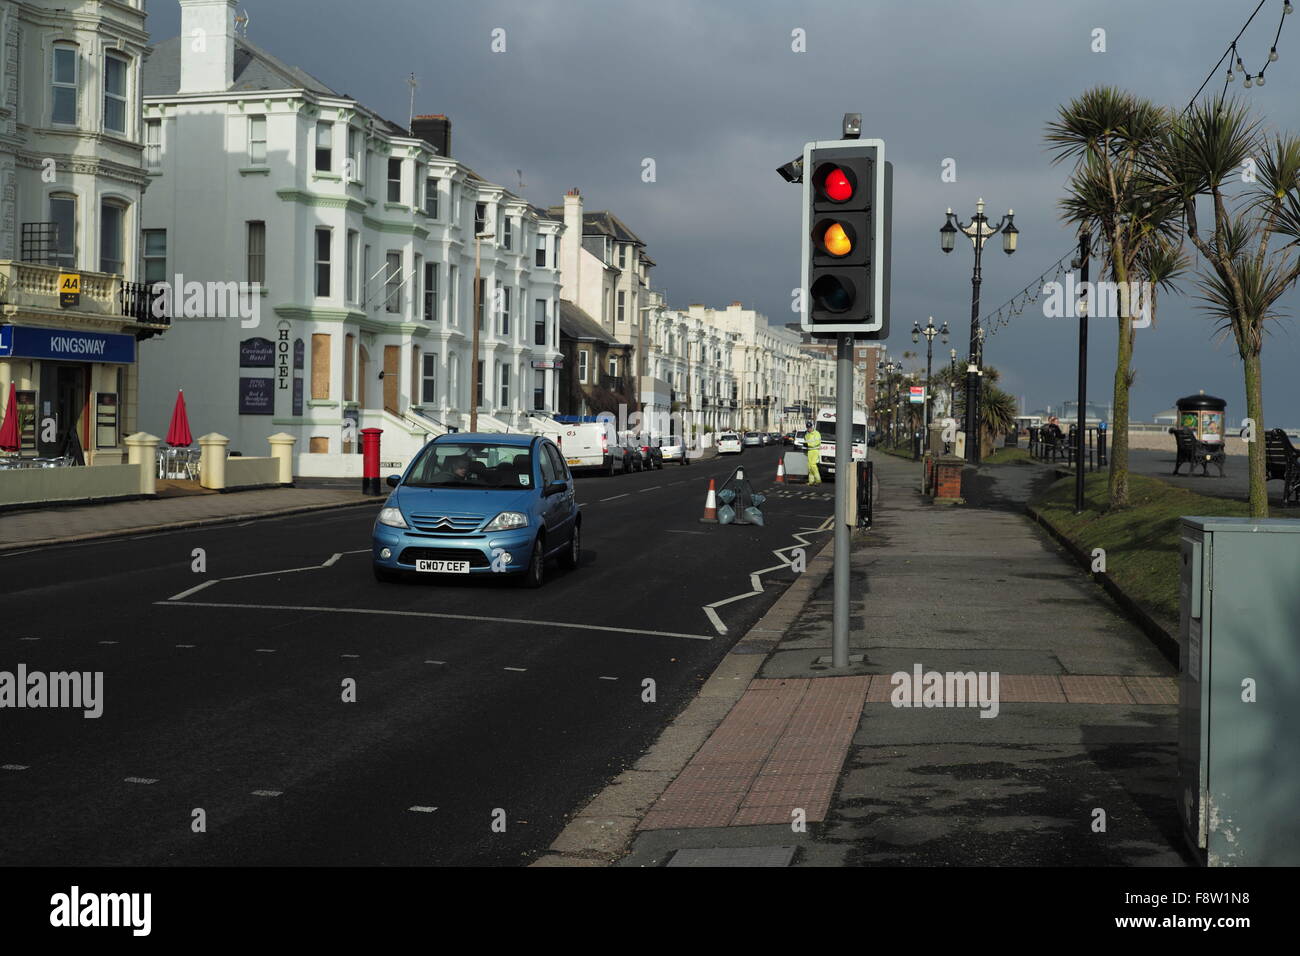 AJAXNETPHOTO. 2013. WORTHING, ENGLAND. - SEAFRONT PROPERTIES - A MIX OF RESIDENTIAL AND COMMERCIAL PROPERTIES OVERLOOK THE SOUTH COAST SEASIDE RESORT PROMENADE AND BEACH. PHOTO:JONATHAN EASTLAND/AJAX REF:LM131904 8723 Stock Photo